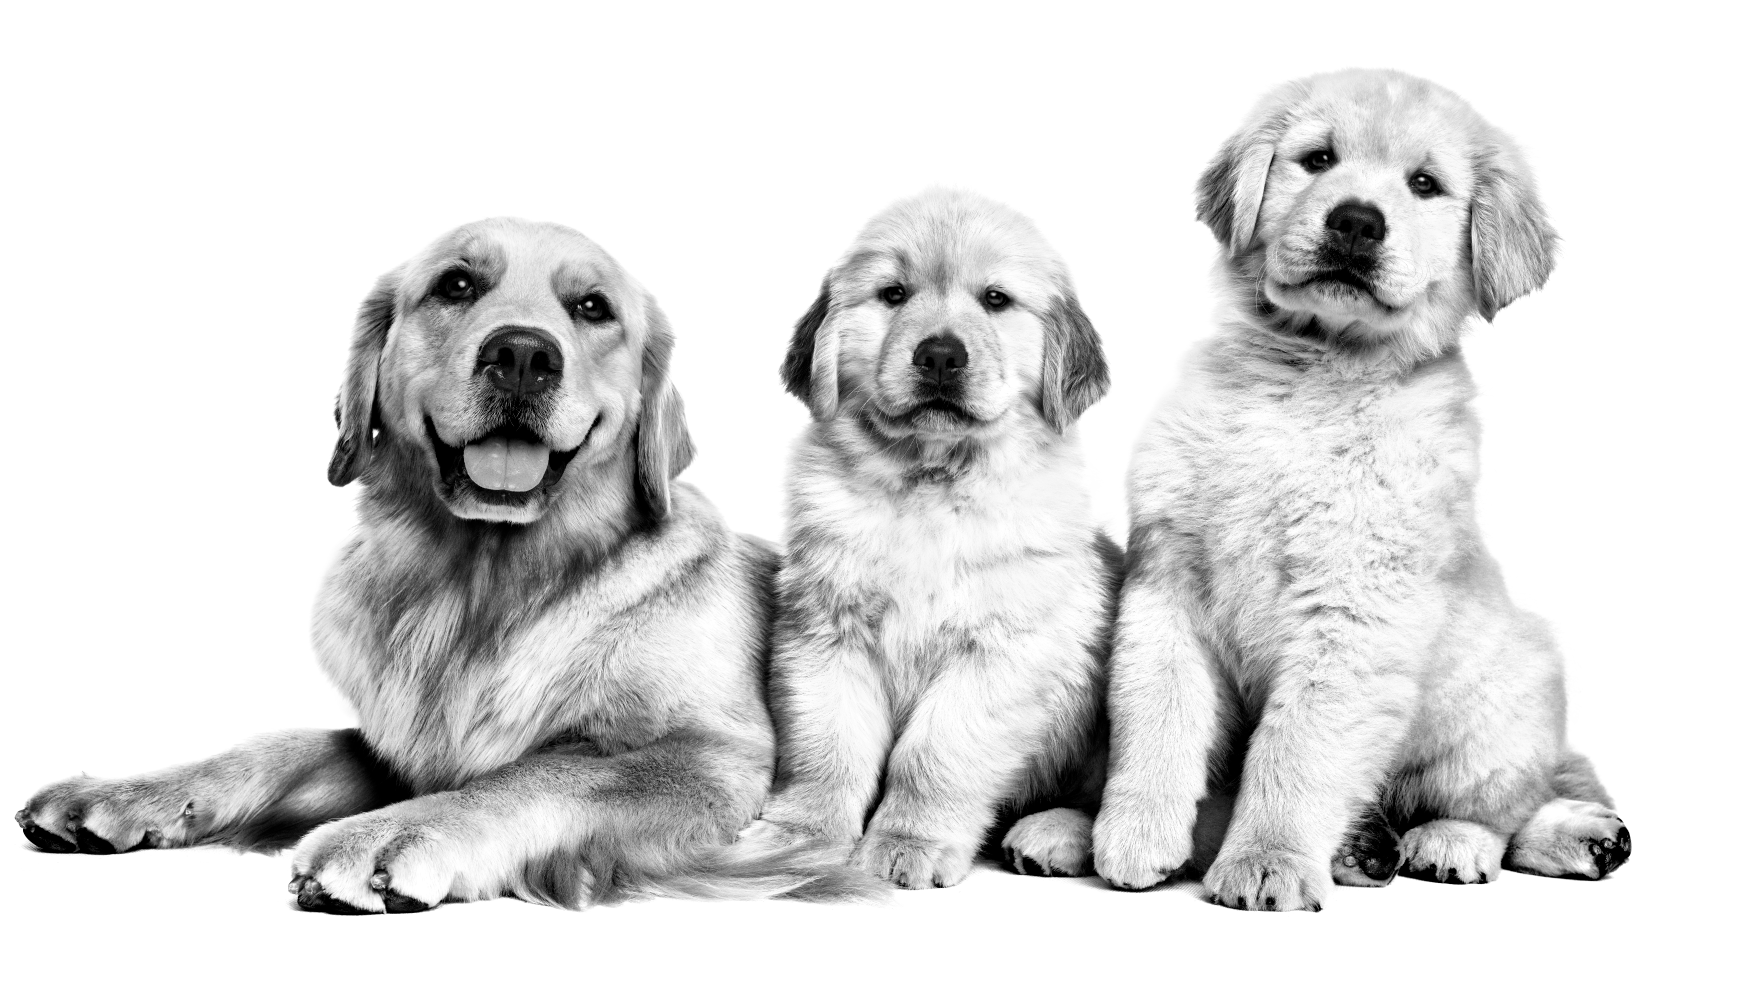 Black and white photo with adult Slovak Cuvac dog and two puppies